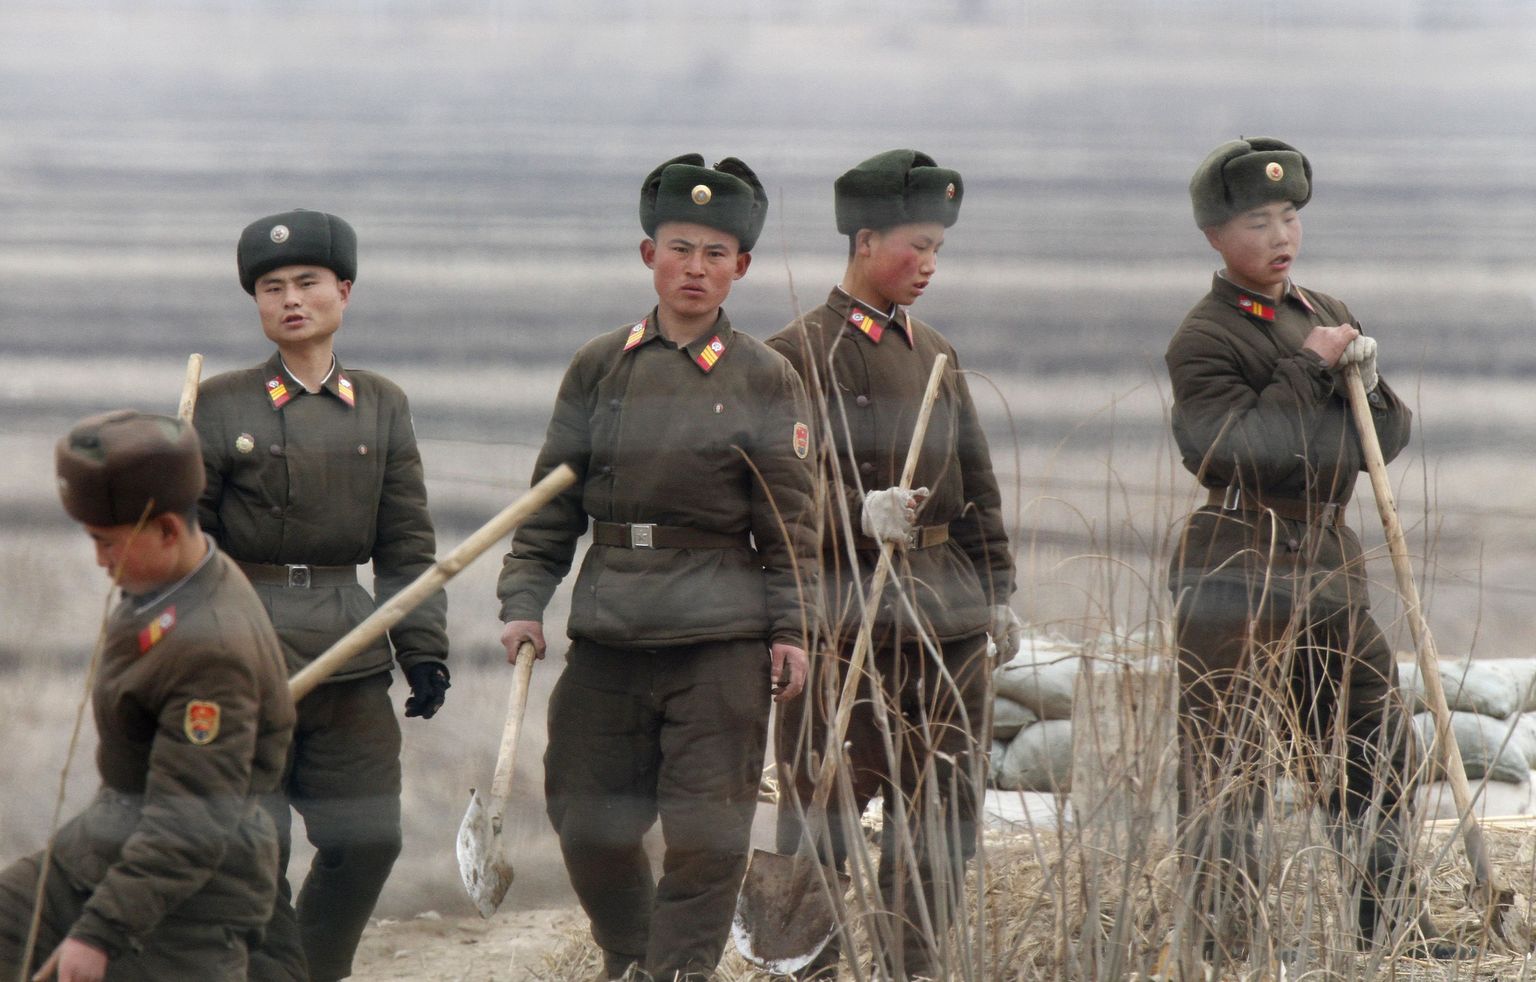 North Korean soldiers are seen through fences as they work with shovels on Hwanggumpyong Island, located in the middle of the Yalu River, near the North Korean town of Sinuiju, opposite the Chinese border city of Dandong, April 13, 2013. U.S. Secretary of State John Kerry met China's top leaders on Saturday in a bid to persuade them to exert pressure on North Korea to scale back its belligerent rhetoric and, eventually, return to nuclear talks. REUTERS/Jacky Chen (NORTH KOREA - Tags: POLITICS MILITARY)